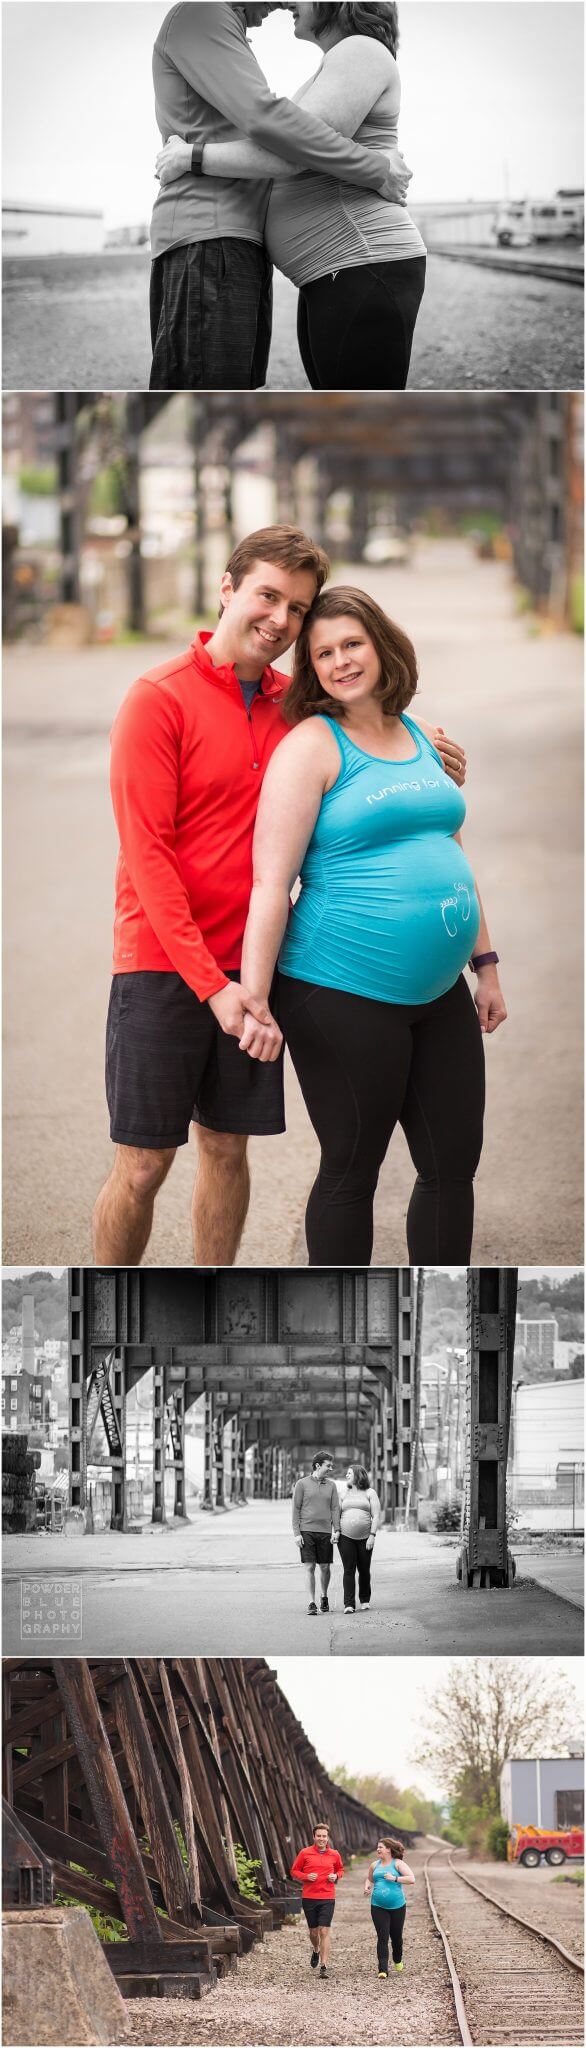 pittsburgh maternity photography session. fitness themed maternity photography portrait session overlooking pittsburgh skyline.